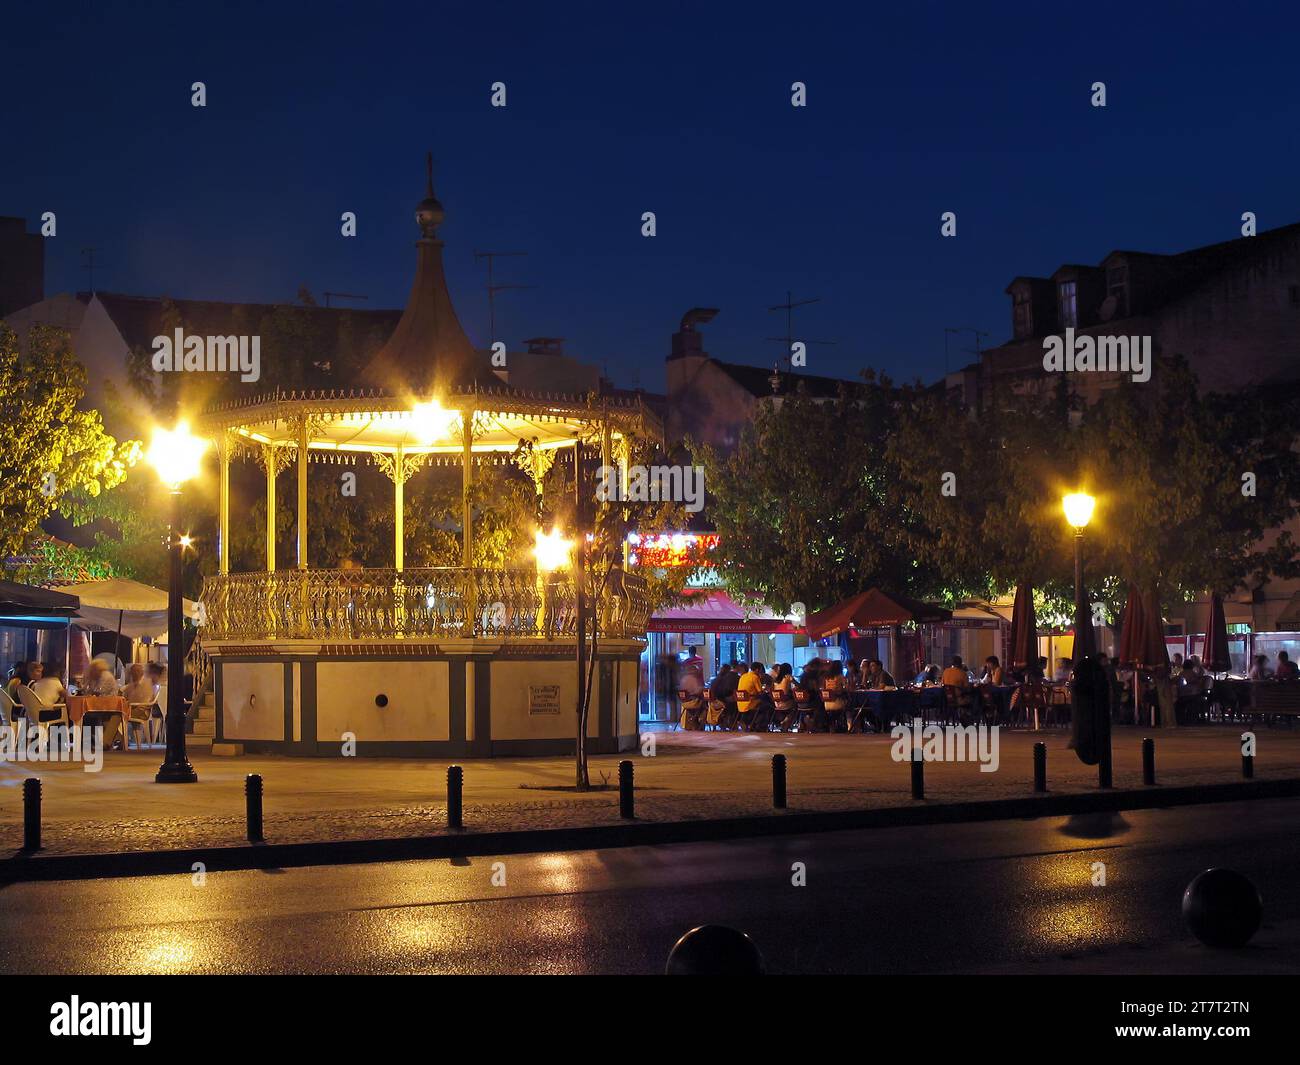 Seixal, Portugal. June 3, 2023: Bandstand in Amora by night with open air restaurants and bars in the square. Seixal, Portugal. Stock Photo